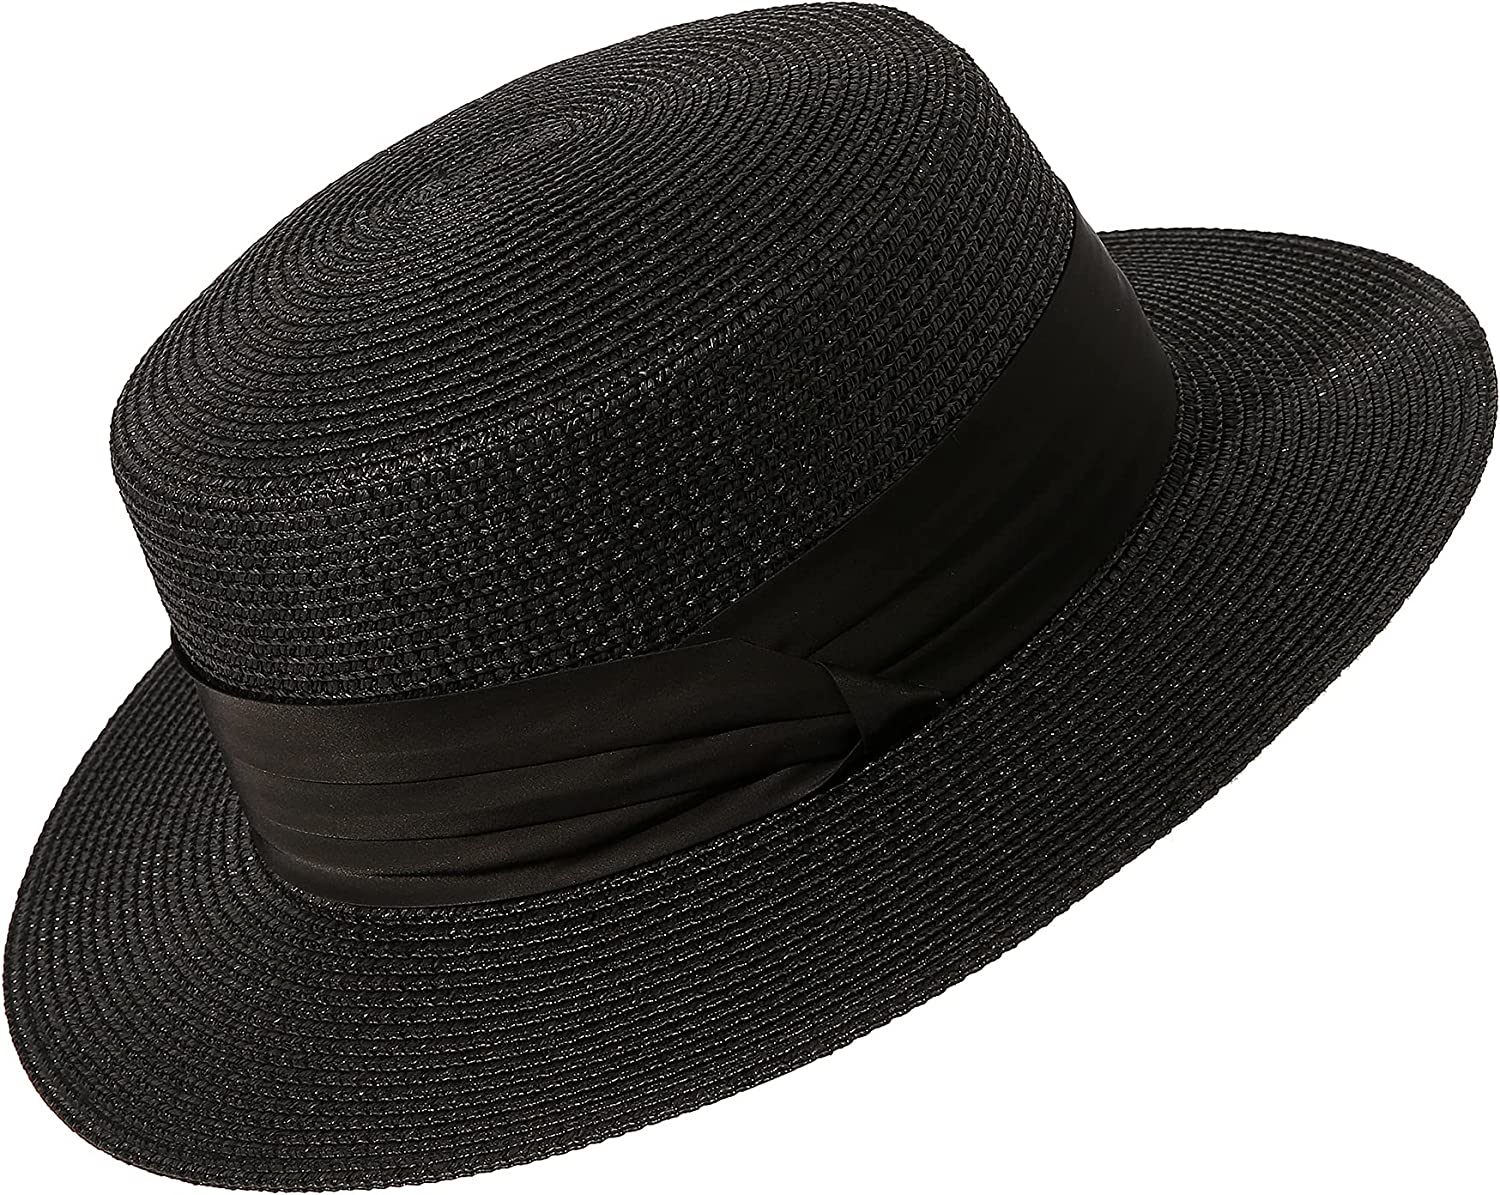 Lanzom Sun Hats for Women Wide Brim Straw Boater Hat Foldable